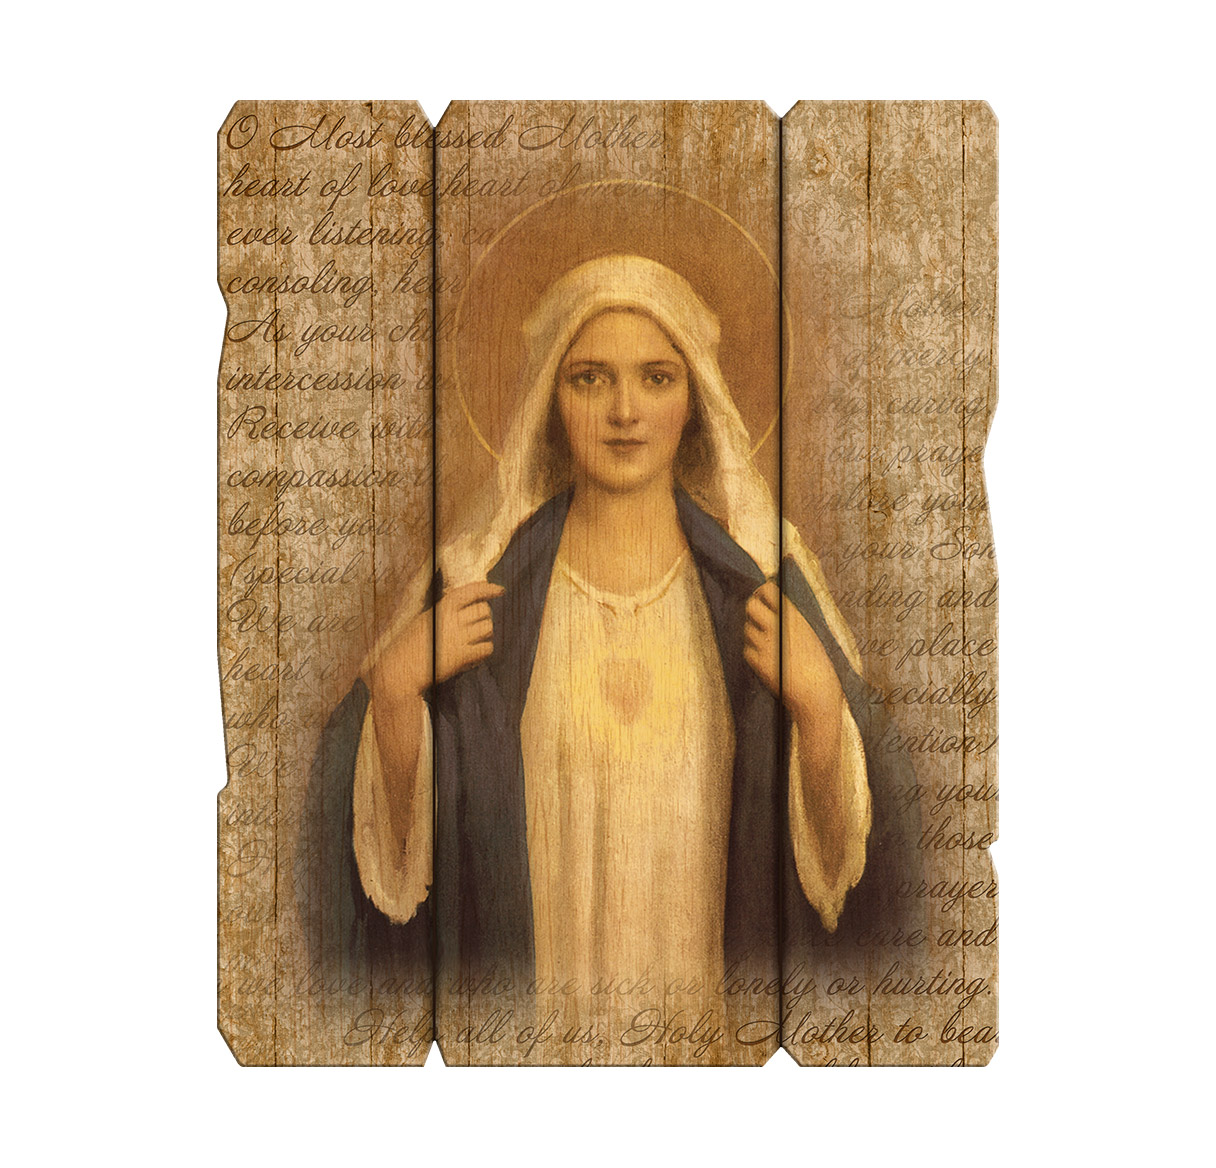 Plaque Immaculate Heart of Mary 7.5 x 9 inch Wood